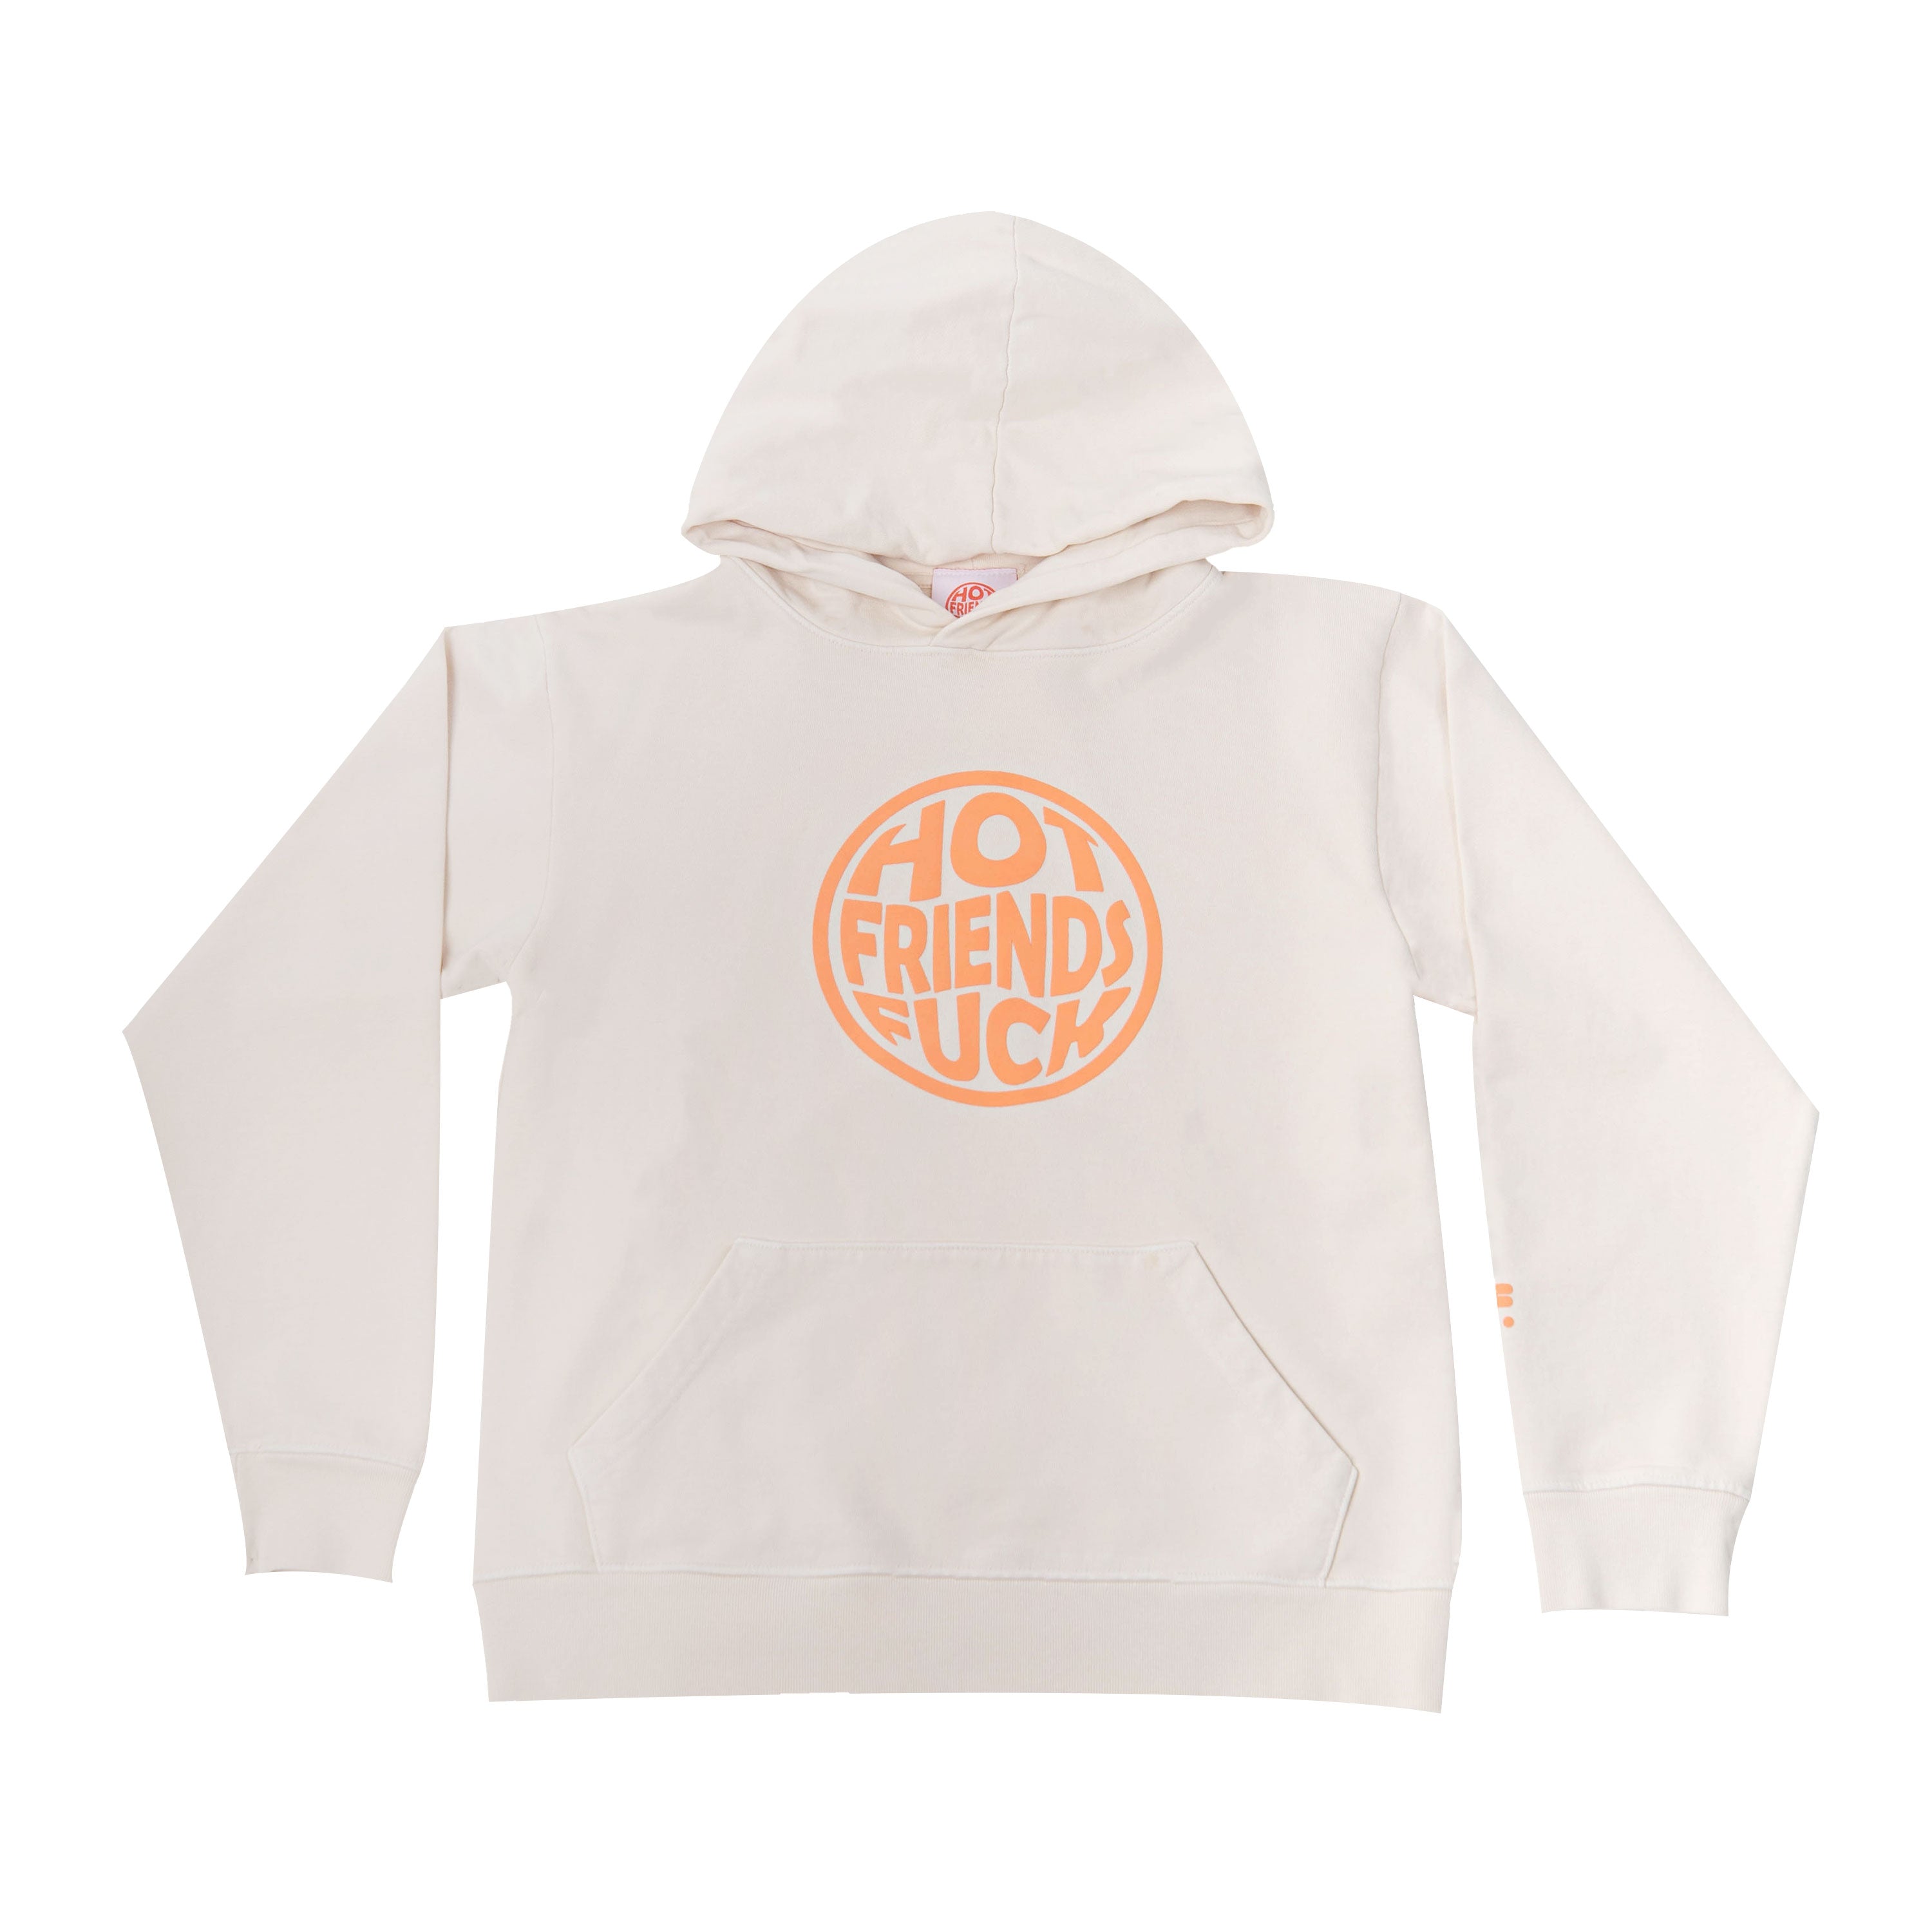 Cream Hoodie with Salmon Pink Puff Print. 20oz French Terry